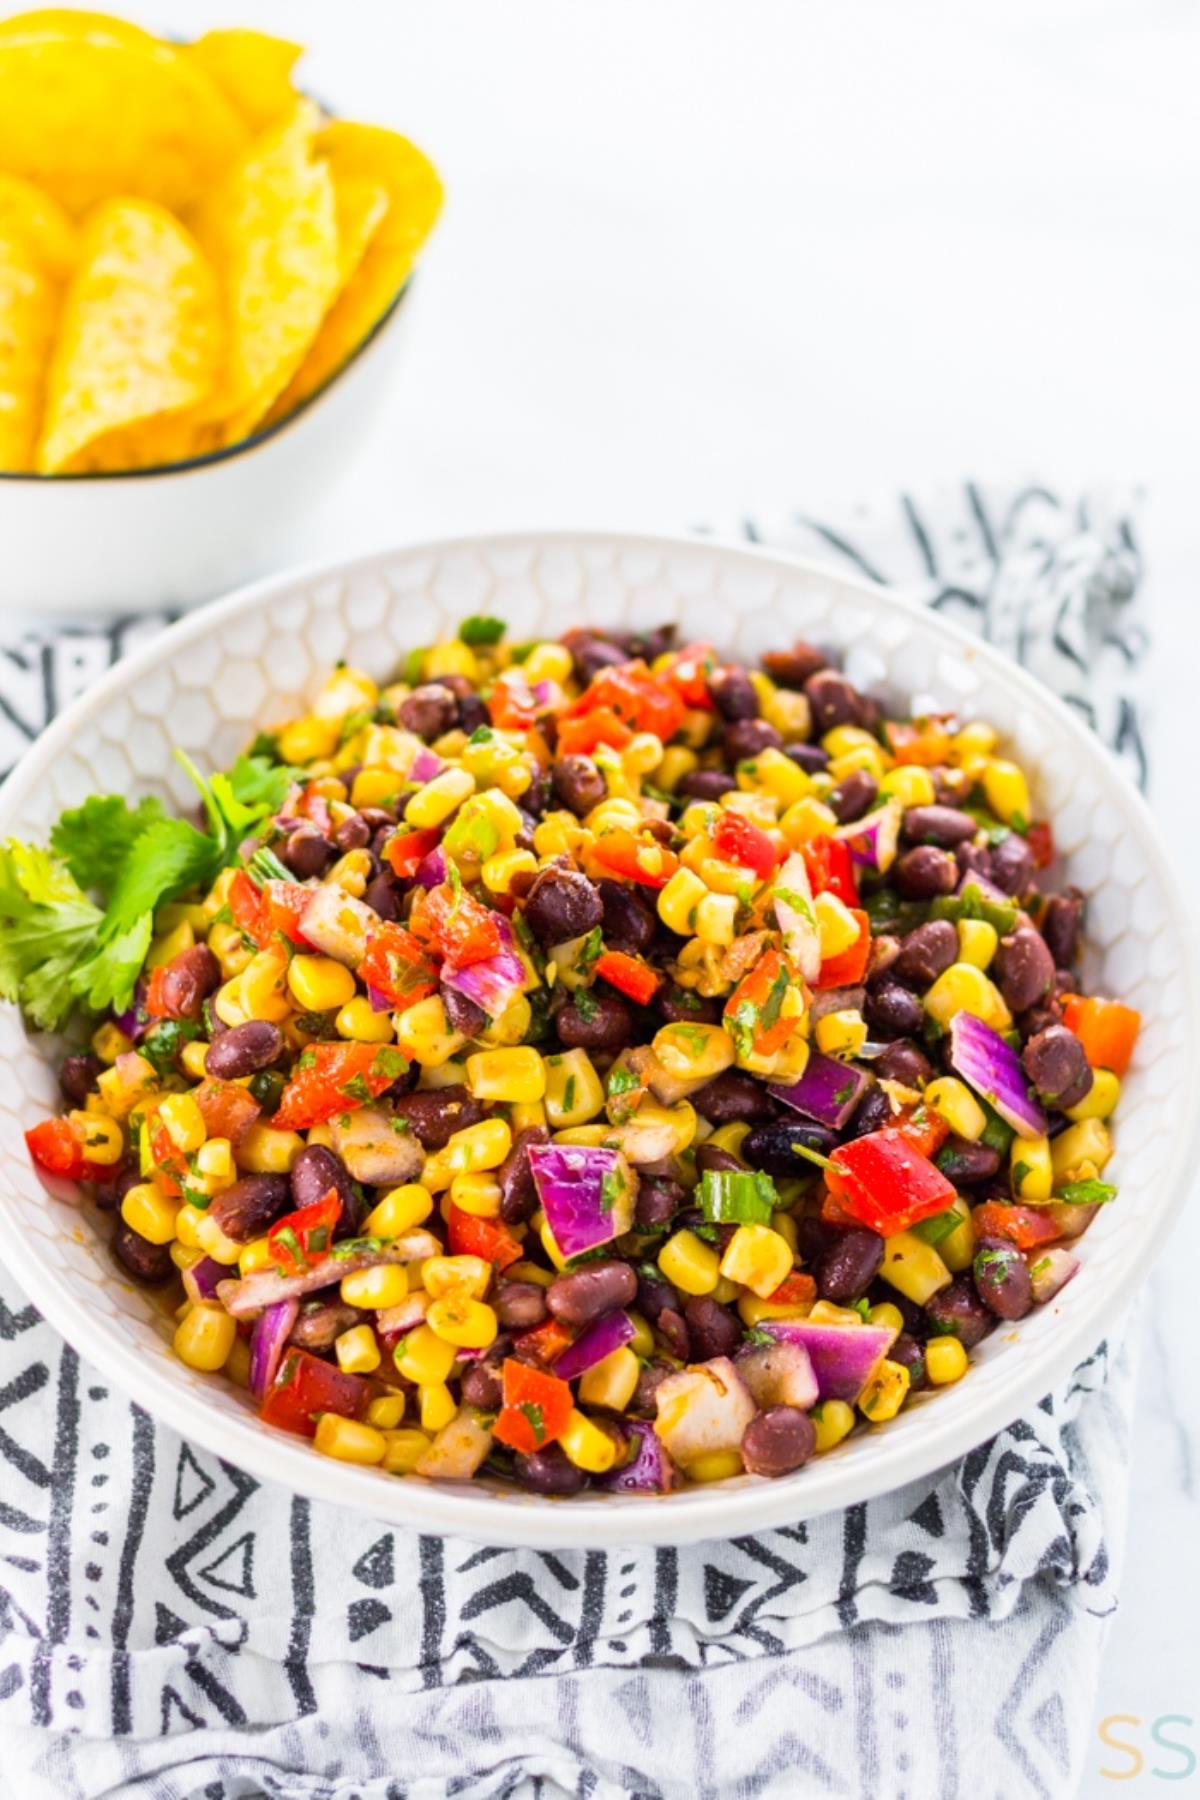 Black bean and corn salsa in white bowl on kitchen towel.